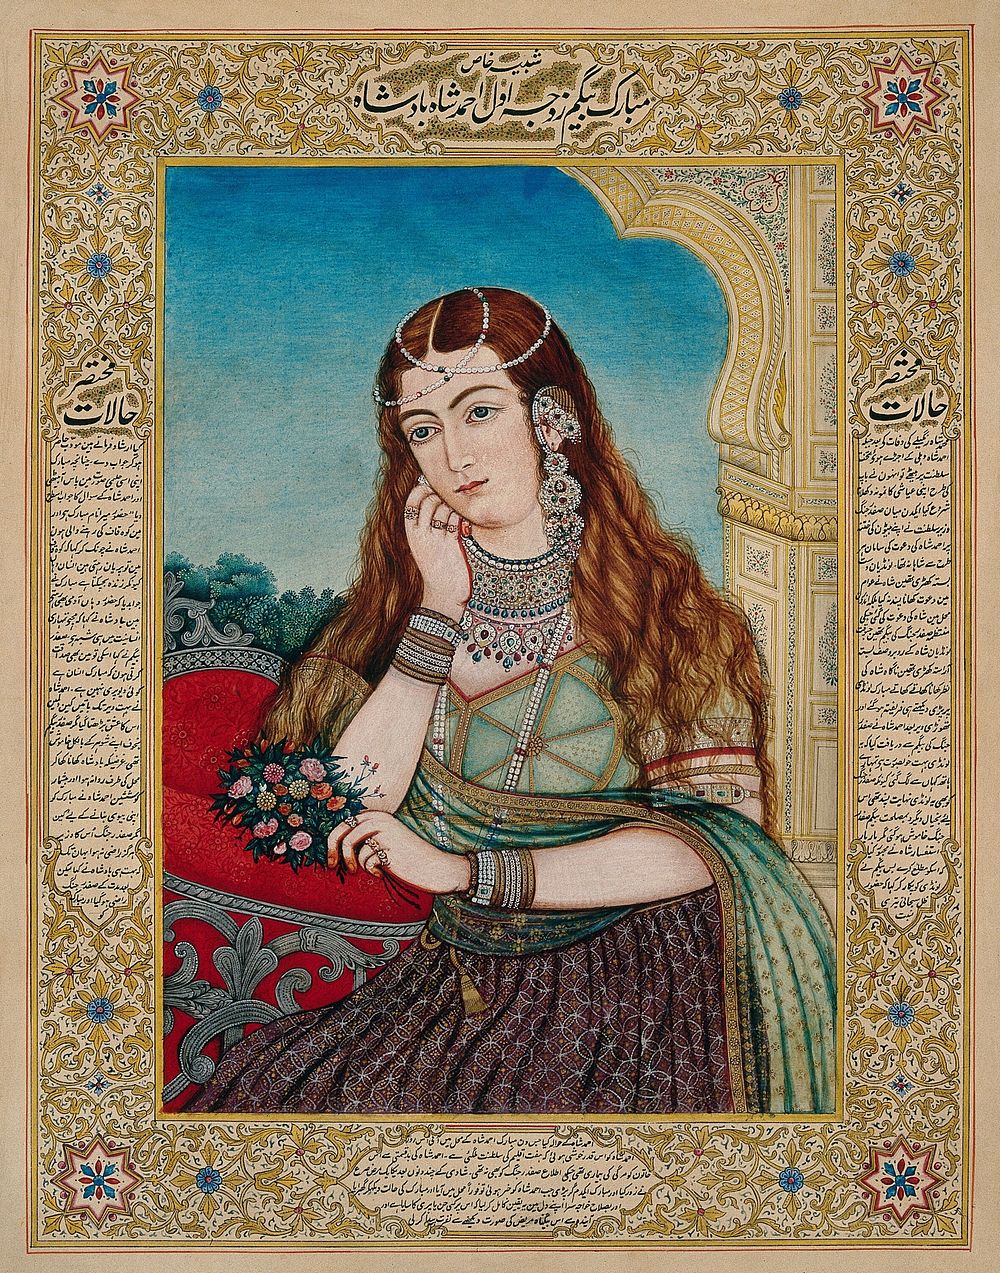 A European woman in Mughal costume and jewellery. Gouache painting by an Indian painter.